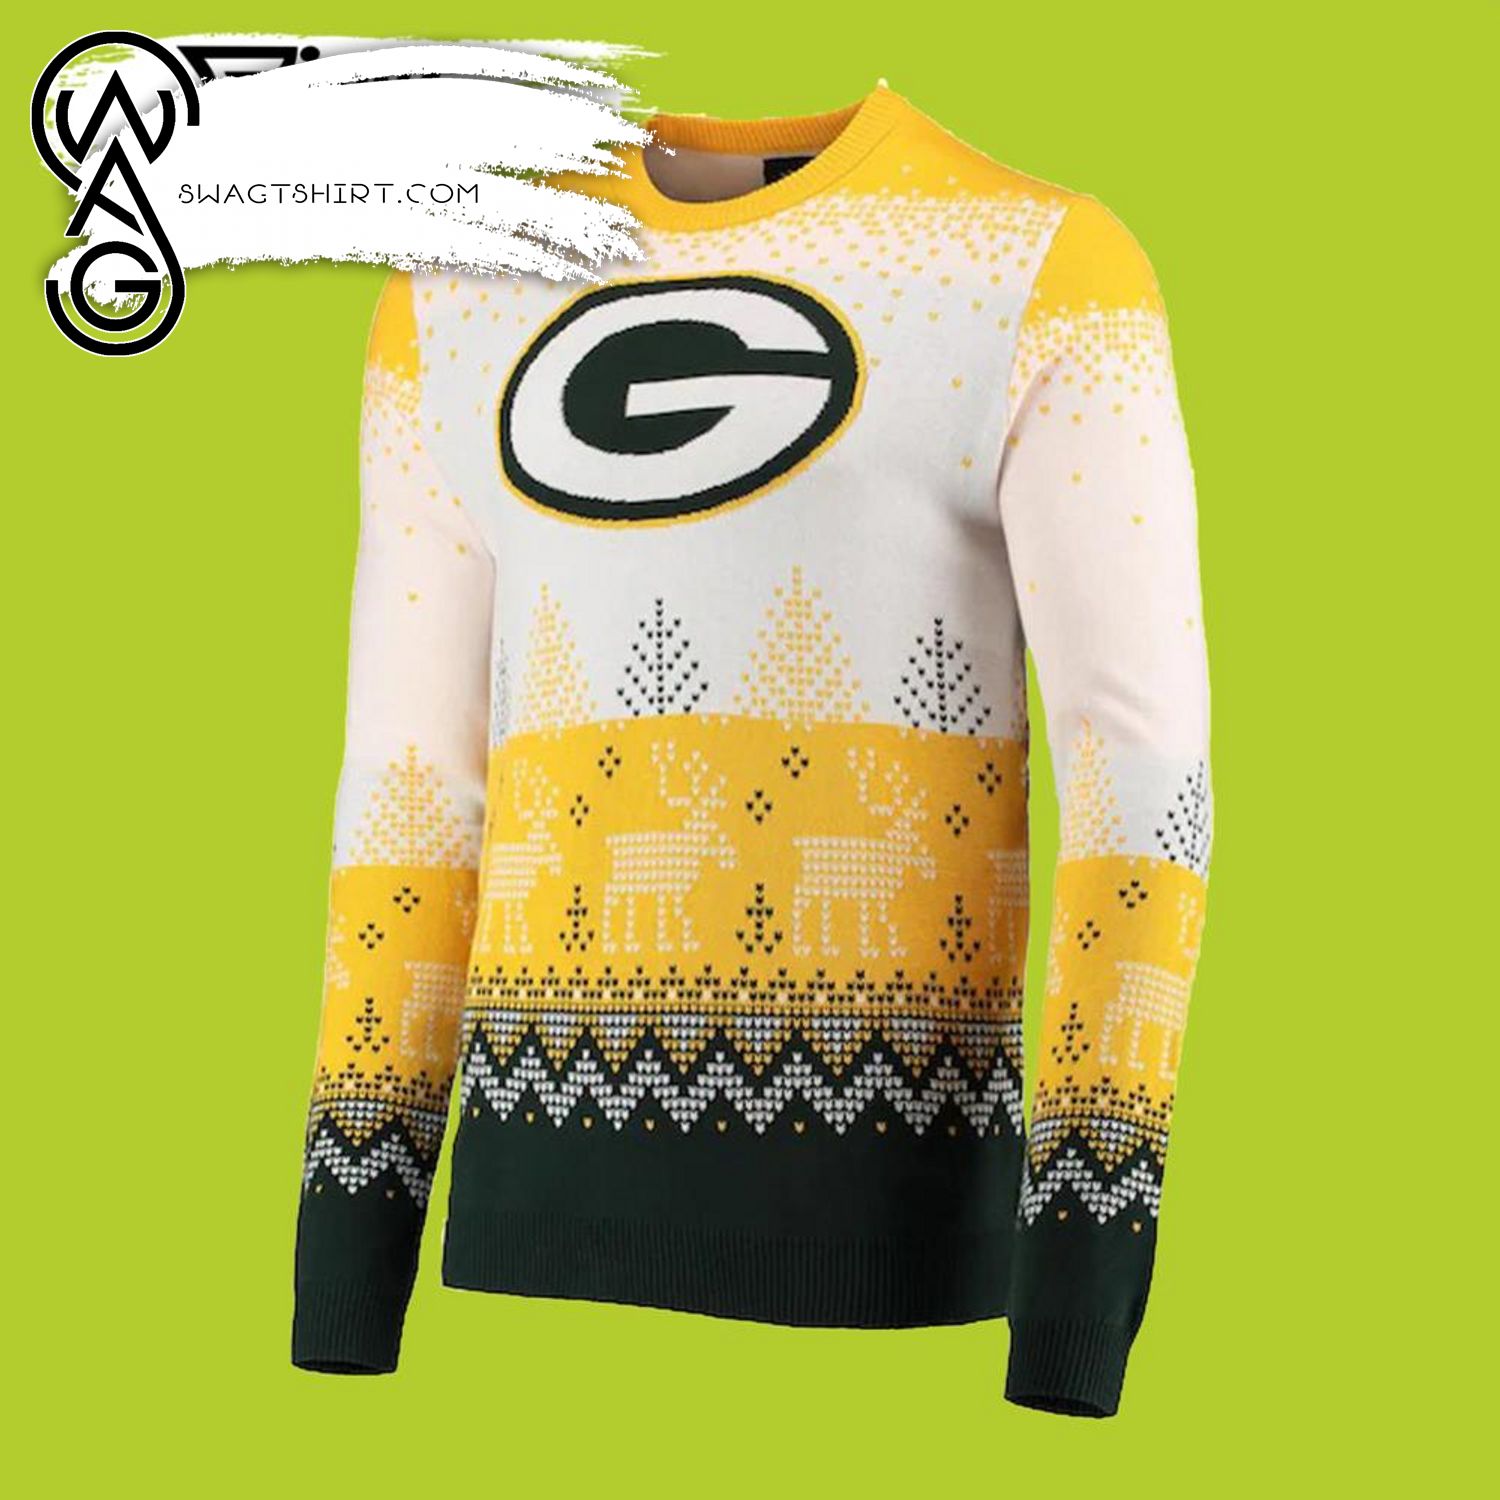 Best Selling Product] Foco White Bay Packers Ugly Christmas Sweater